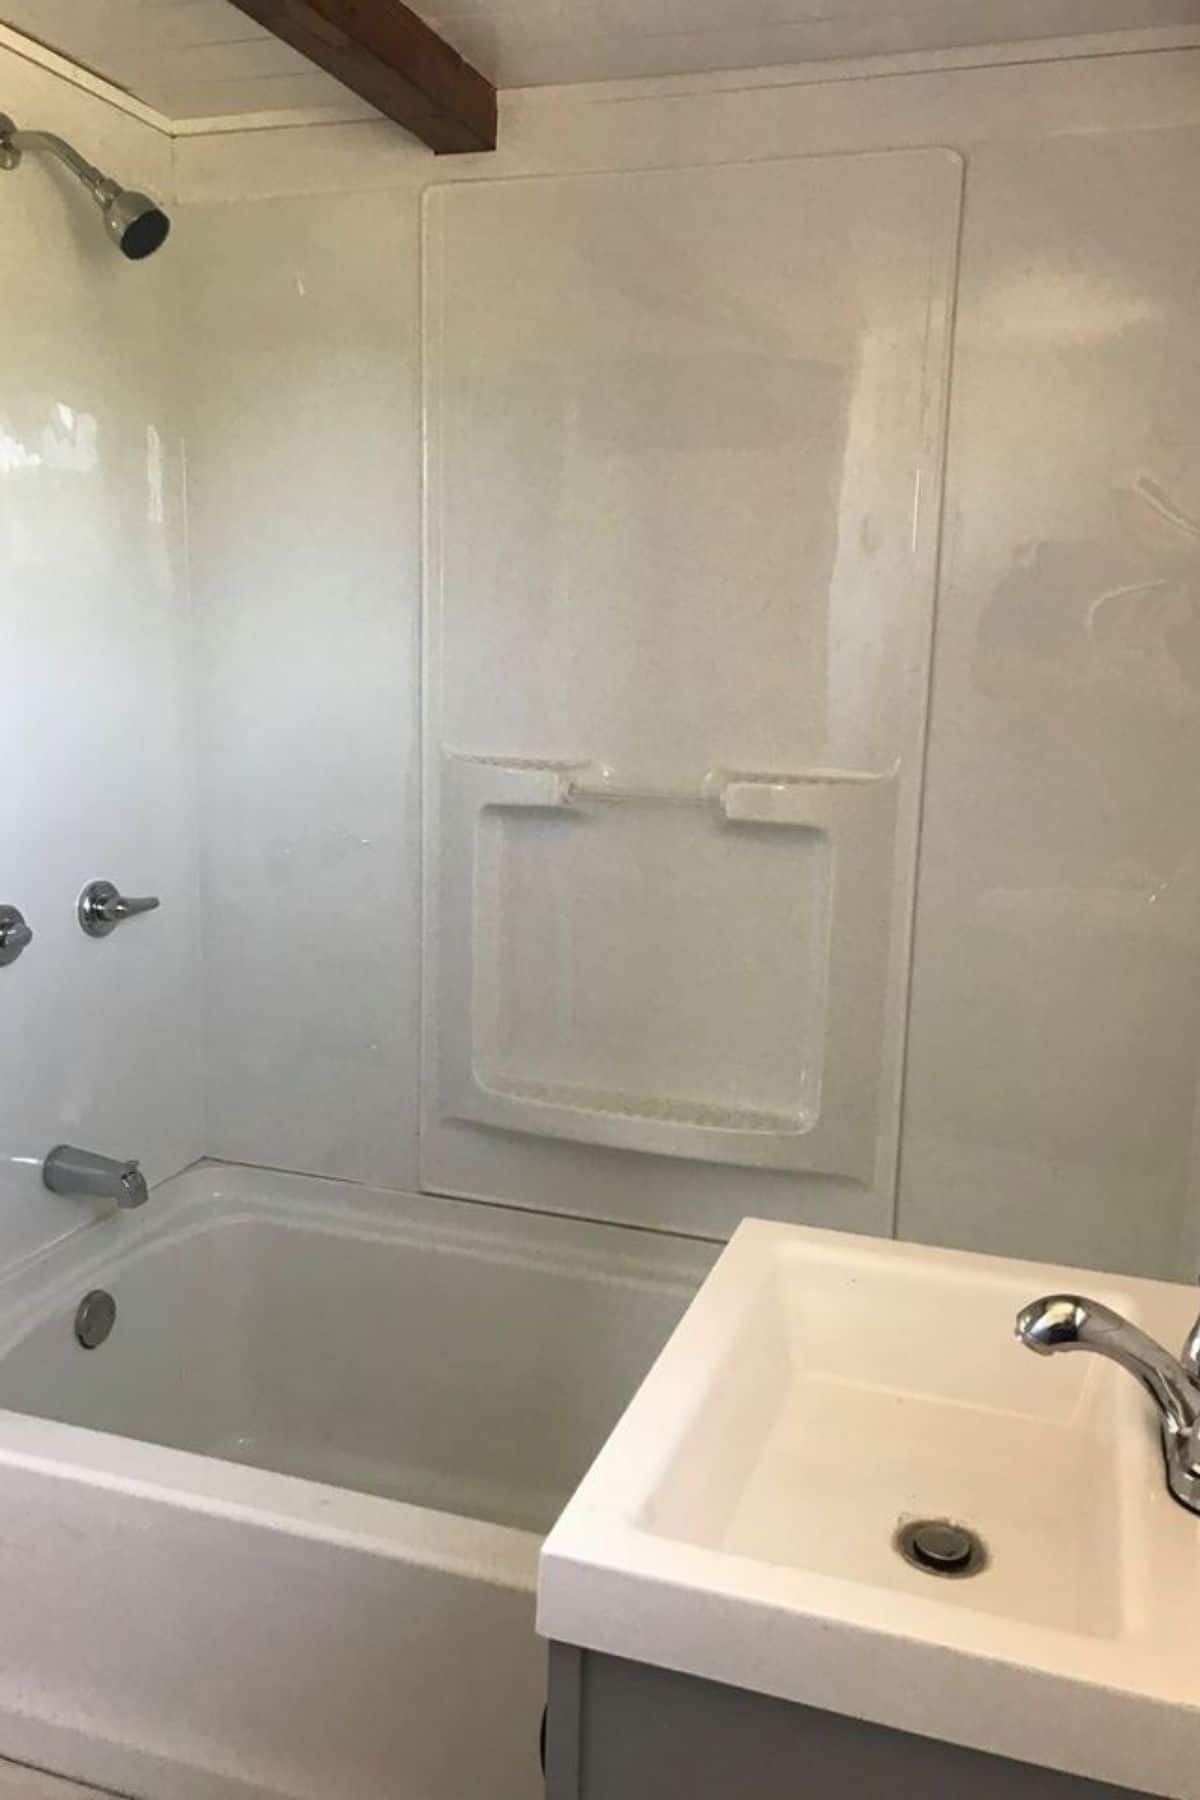 Bathtub with shower inset and wall shelves